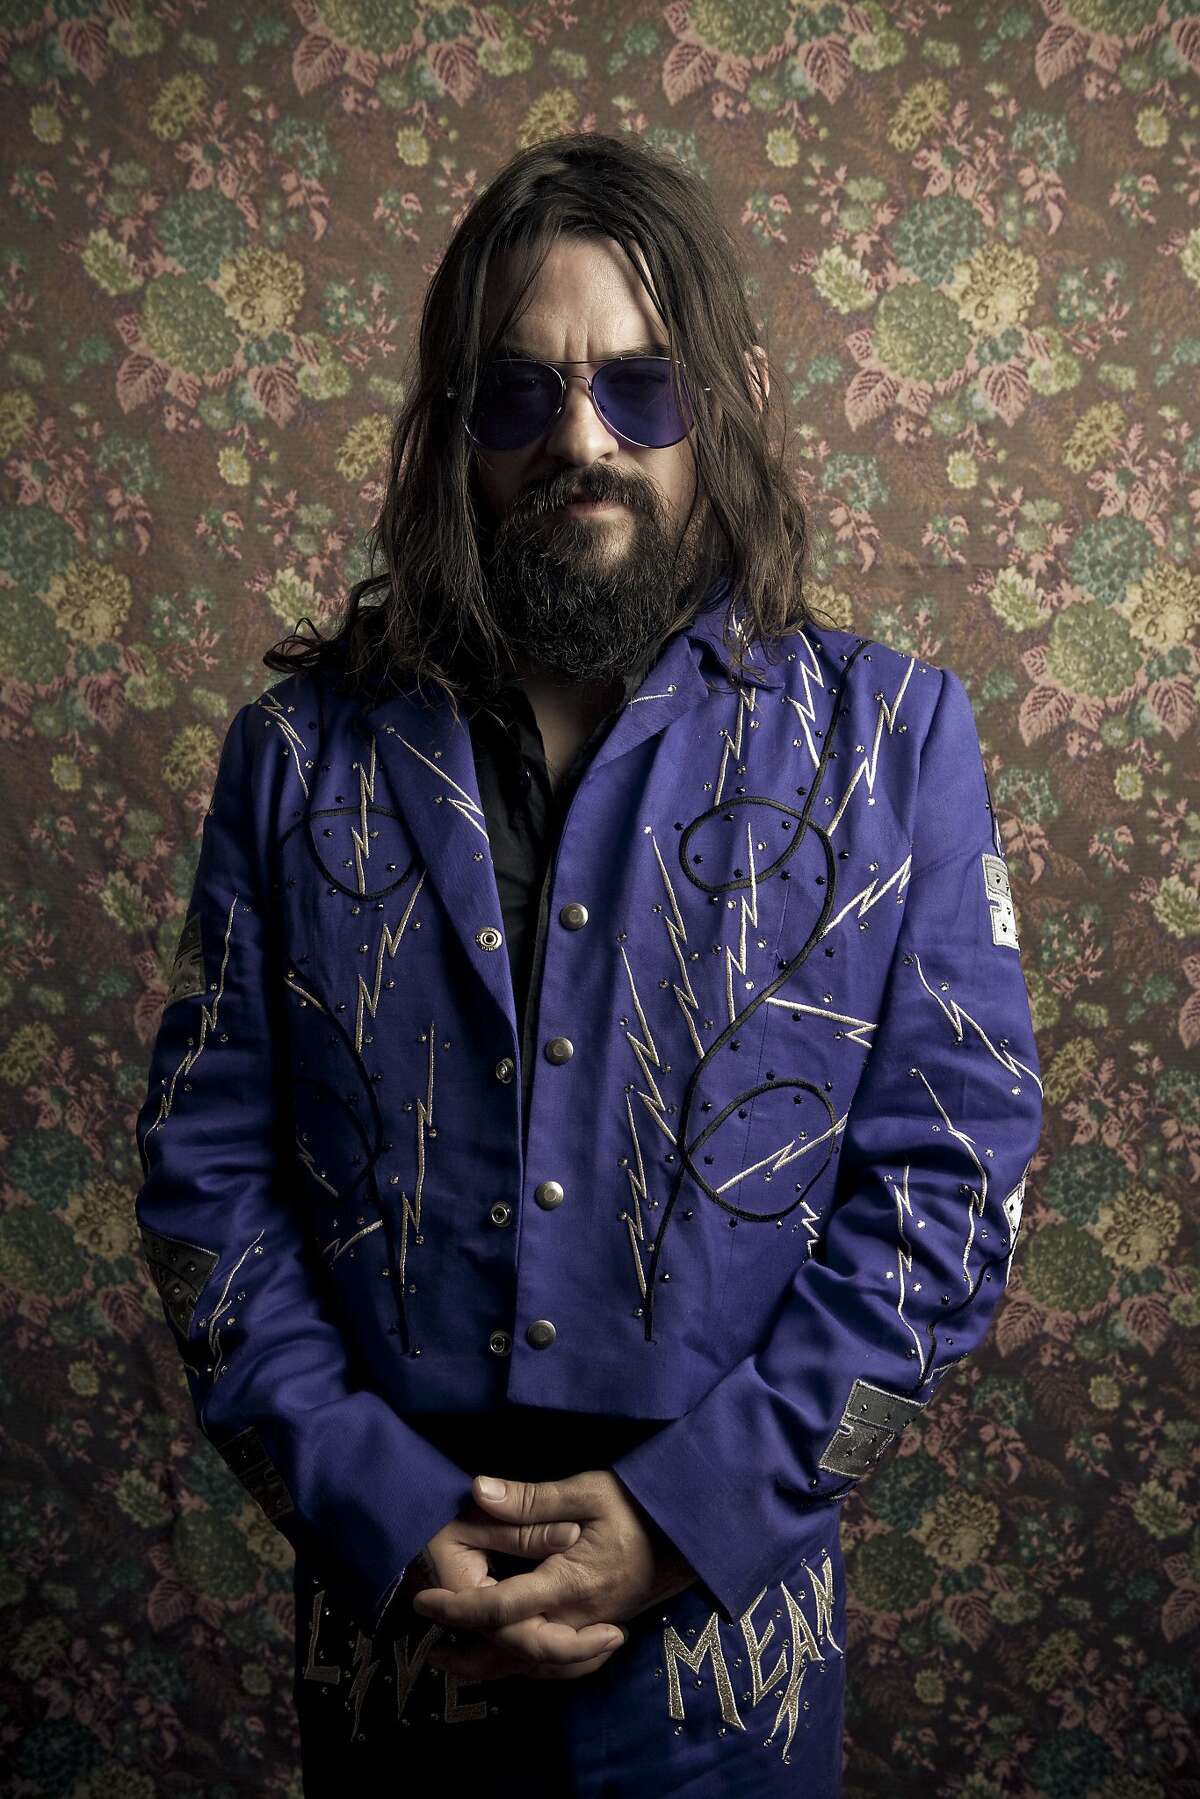 JUNE 10: Great Americana Music Fest featuring Shooter Jennings Downtown Event Centre Beaumont 12 p.m.